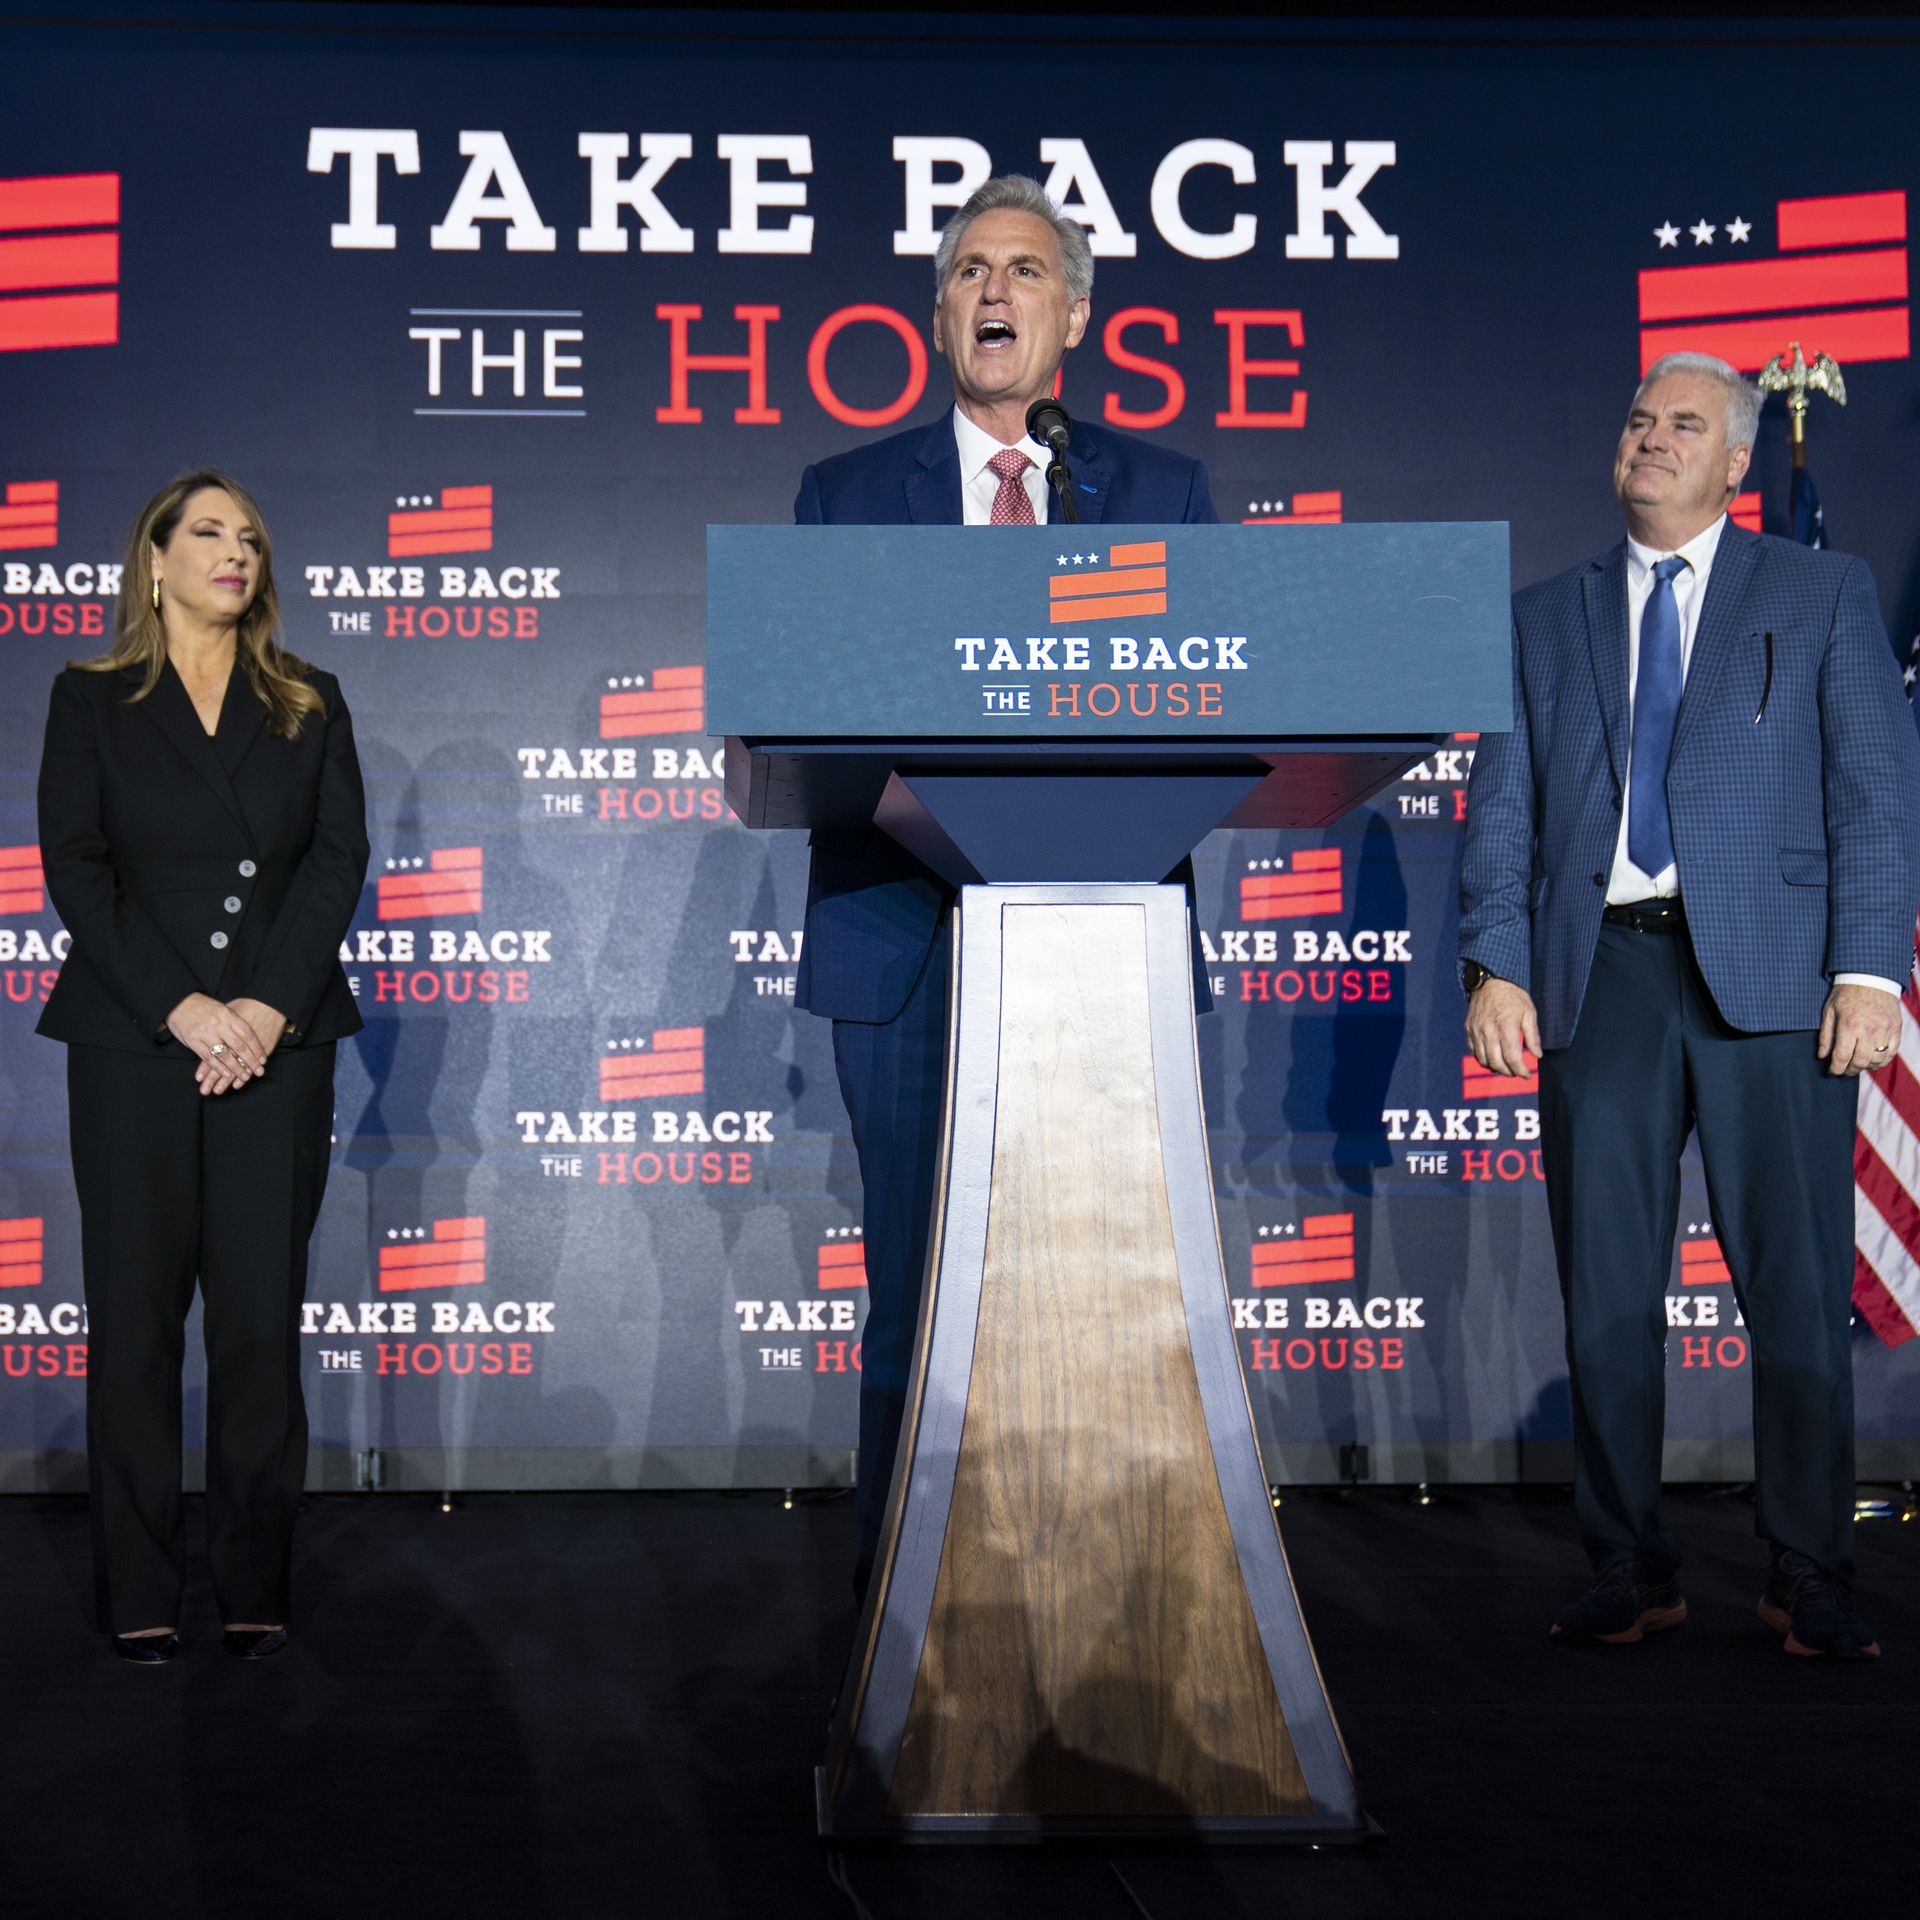 House Minority Leader Rep. Kevin McCarthy (R-CA) delivers remarks to supporters alongside Ronna Romney McDaniel, Republican National Committee chair, and Rep. Tom Emmer (R-MN)